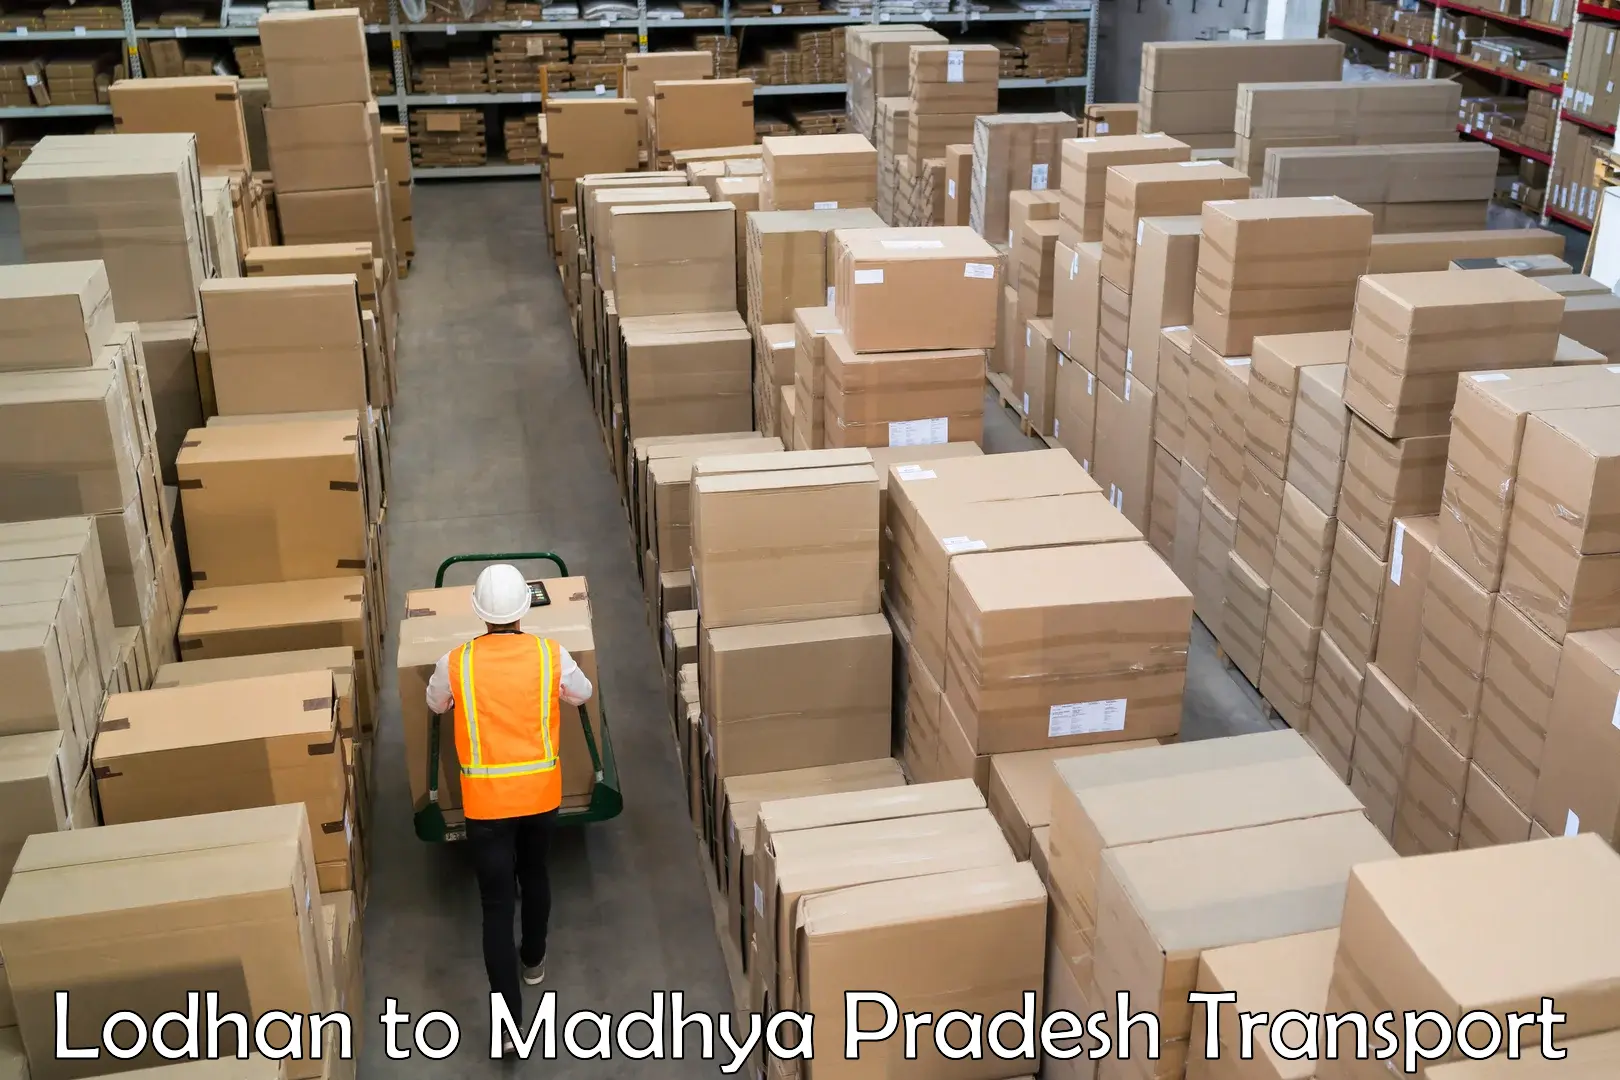 Part load transport service in India Lodhan to Madhya Pradesh